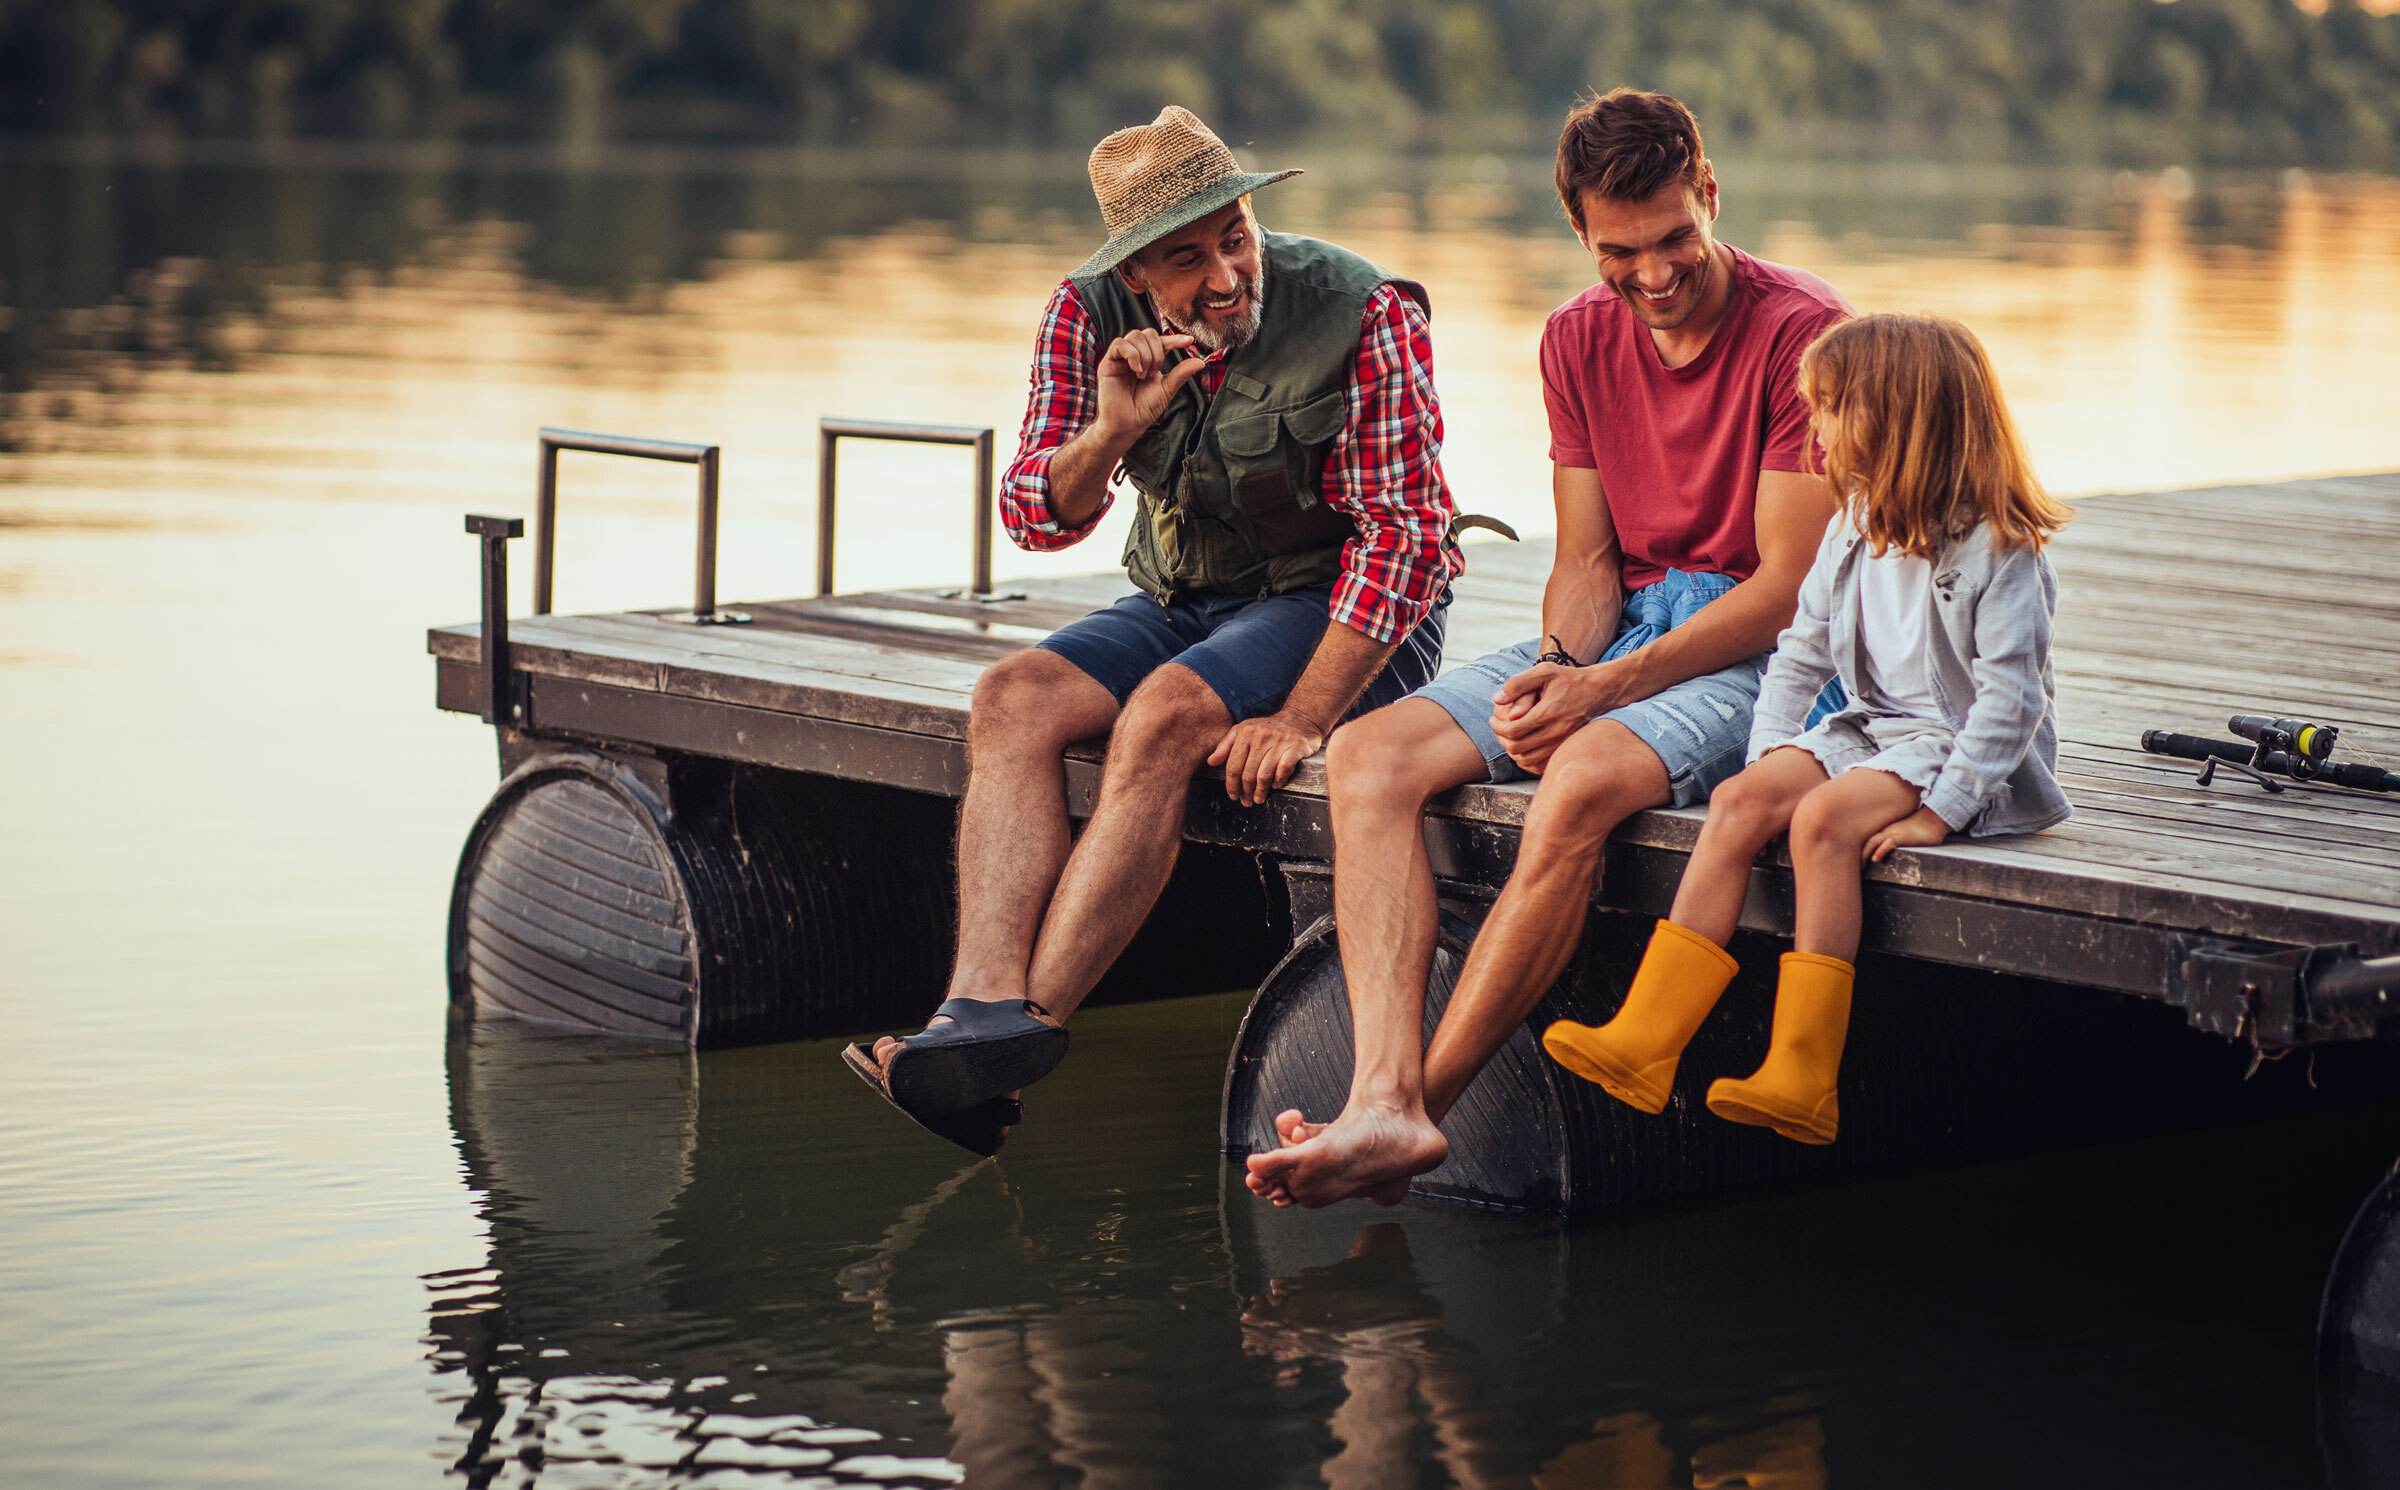 A grandfather, father and daughter sit on a dock with their legs dangling over the water.